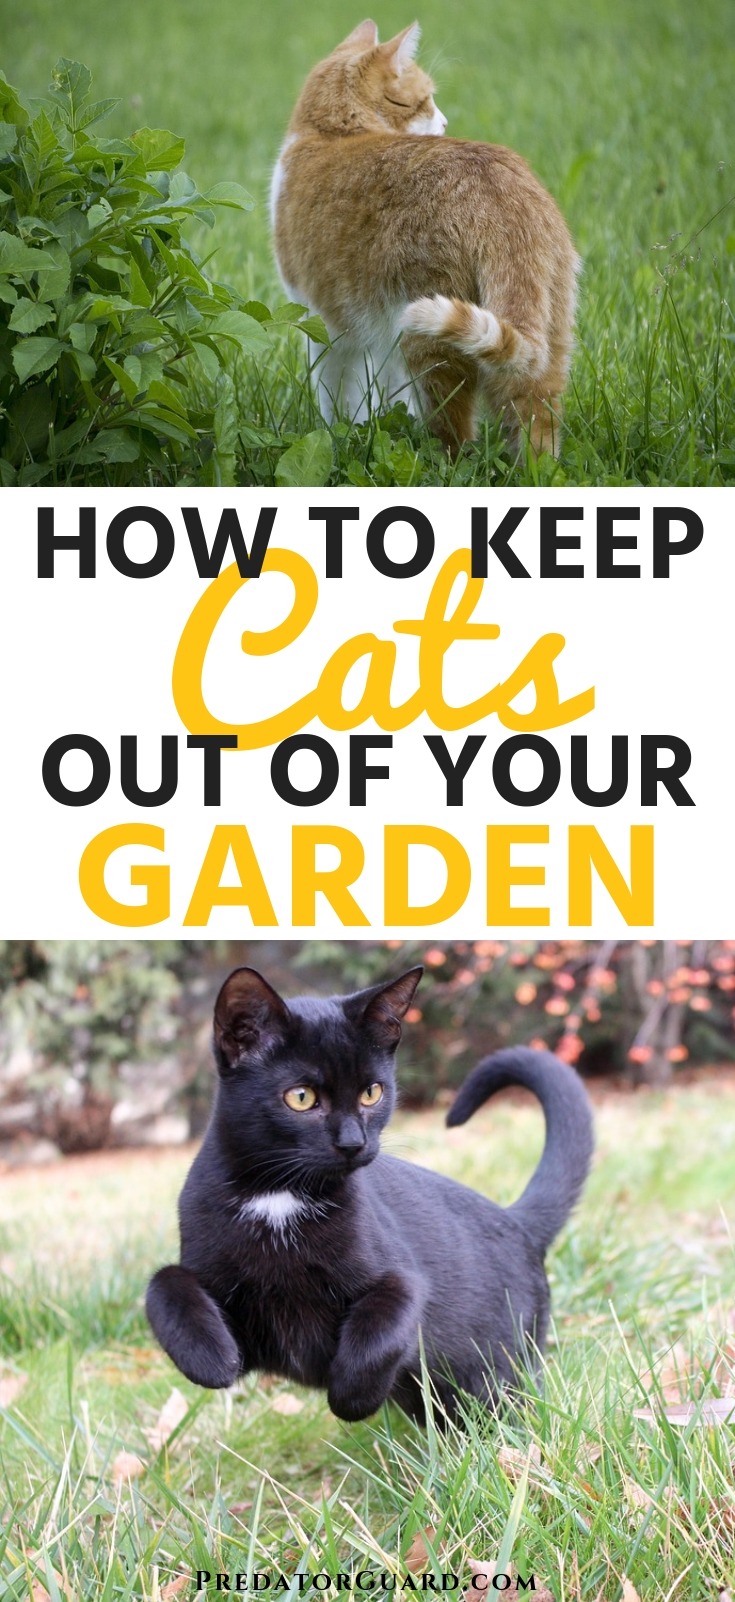 How-To-Keep-Cats-Out-of-Your-Garden-Predator-Guard-Blog